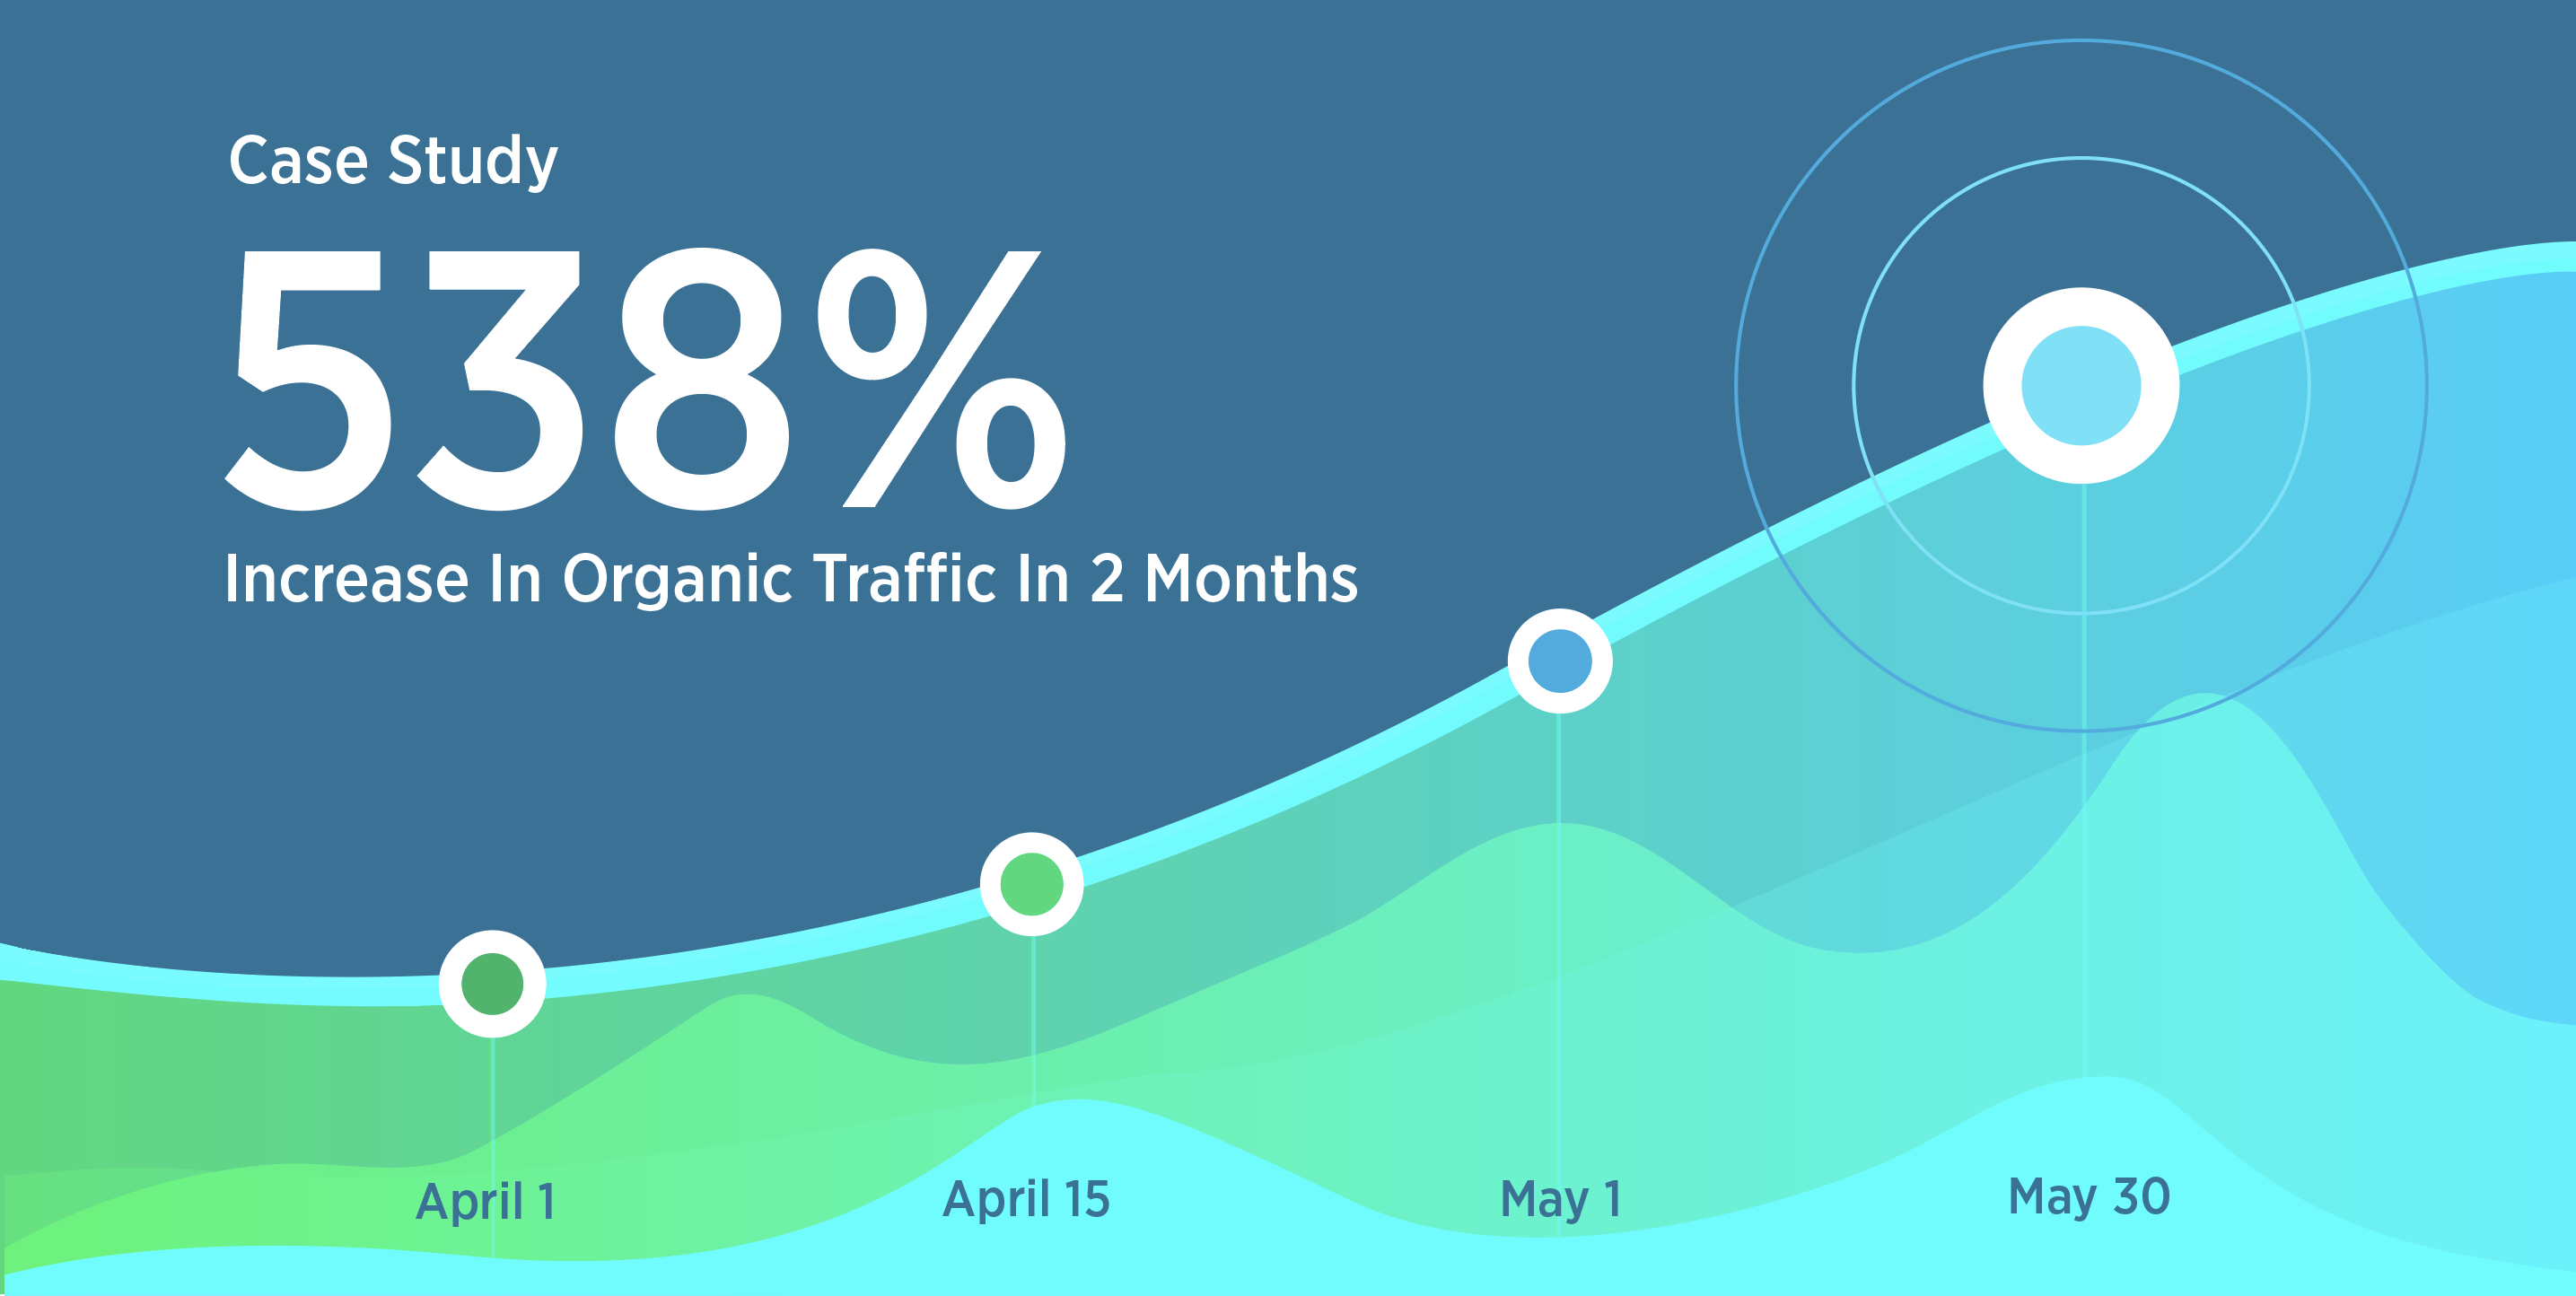 Case Study 538% Increase in Organic Traffic in 2 Months